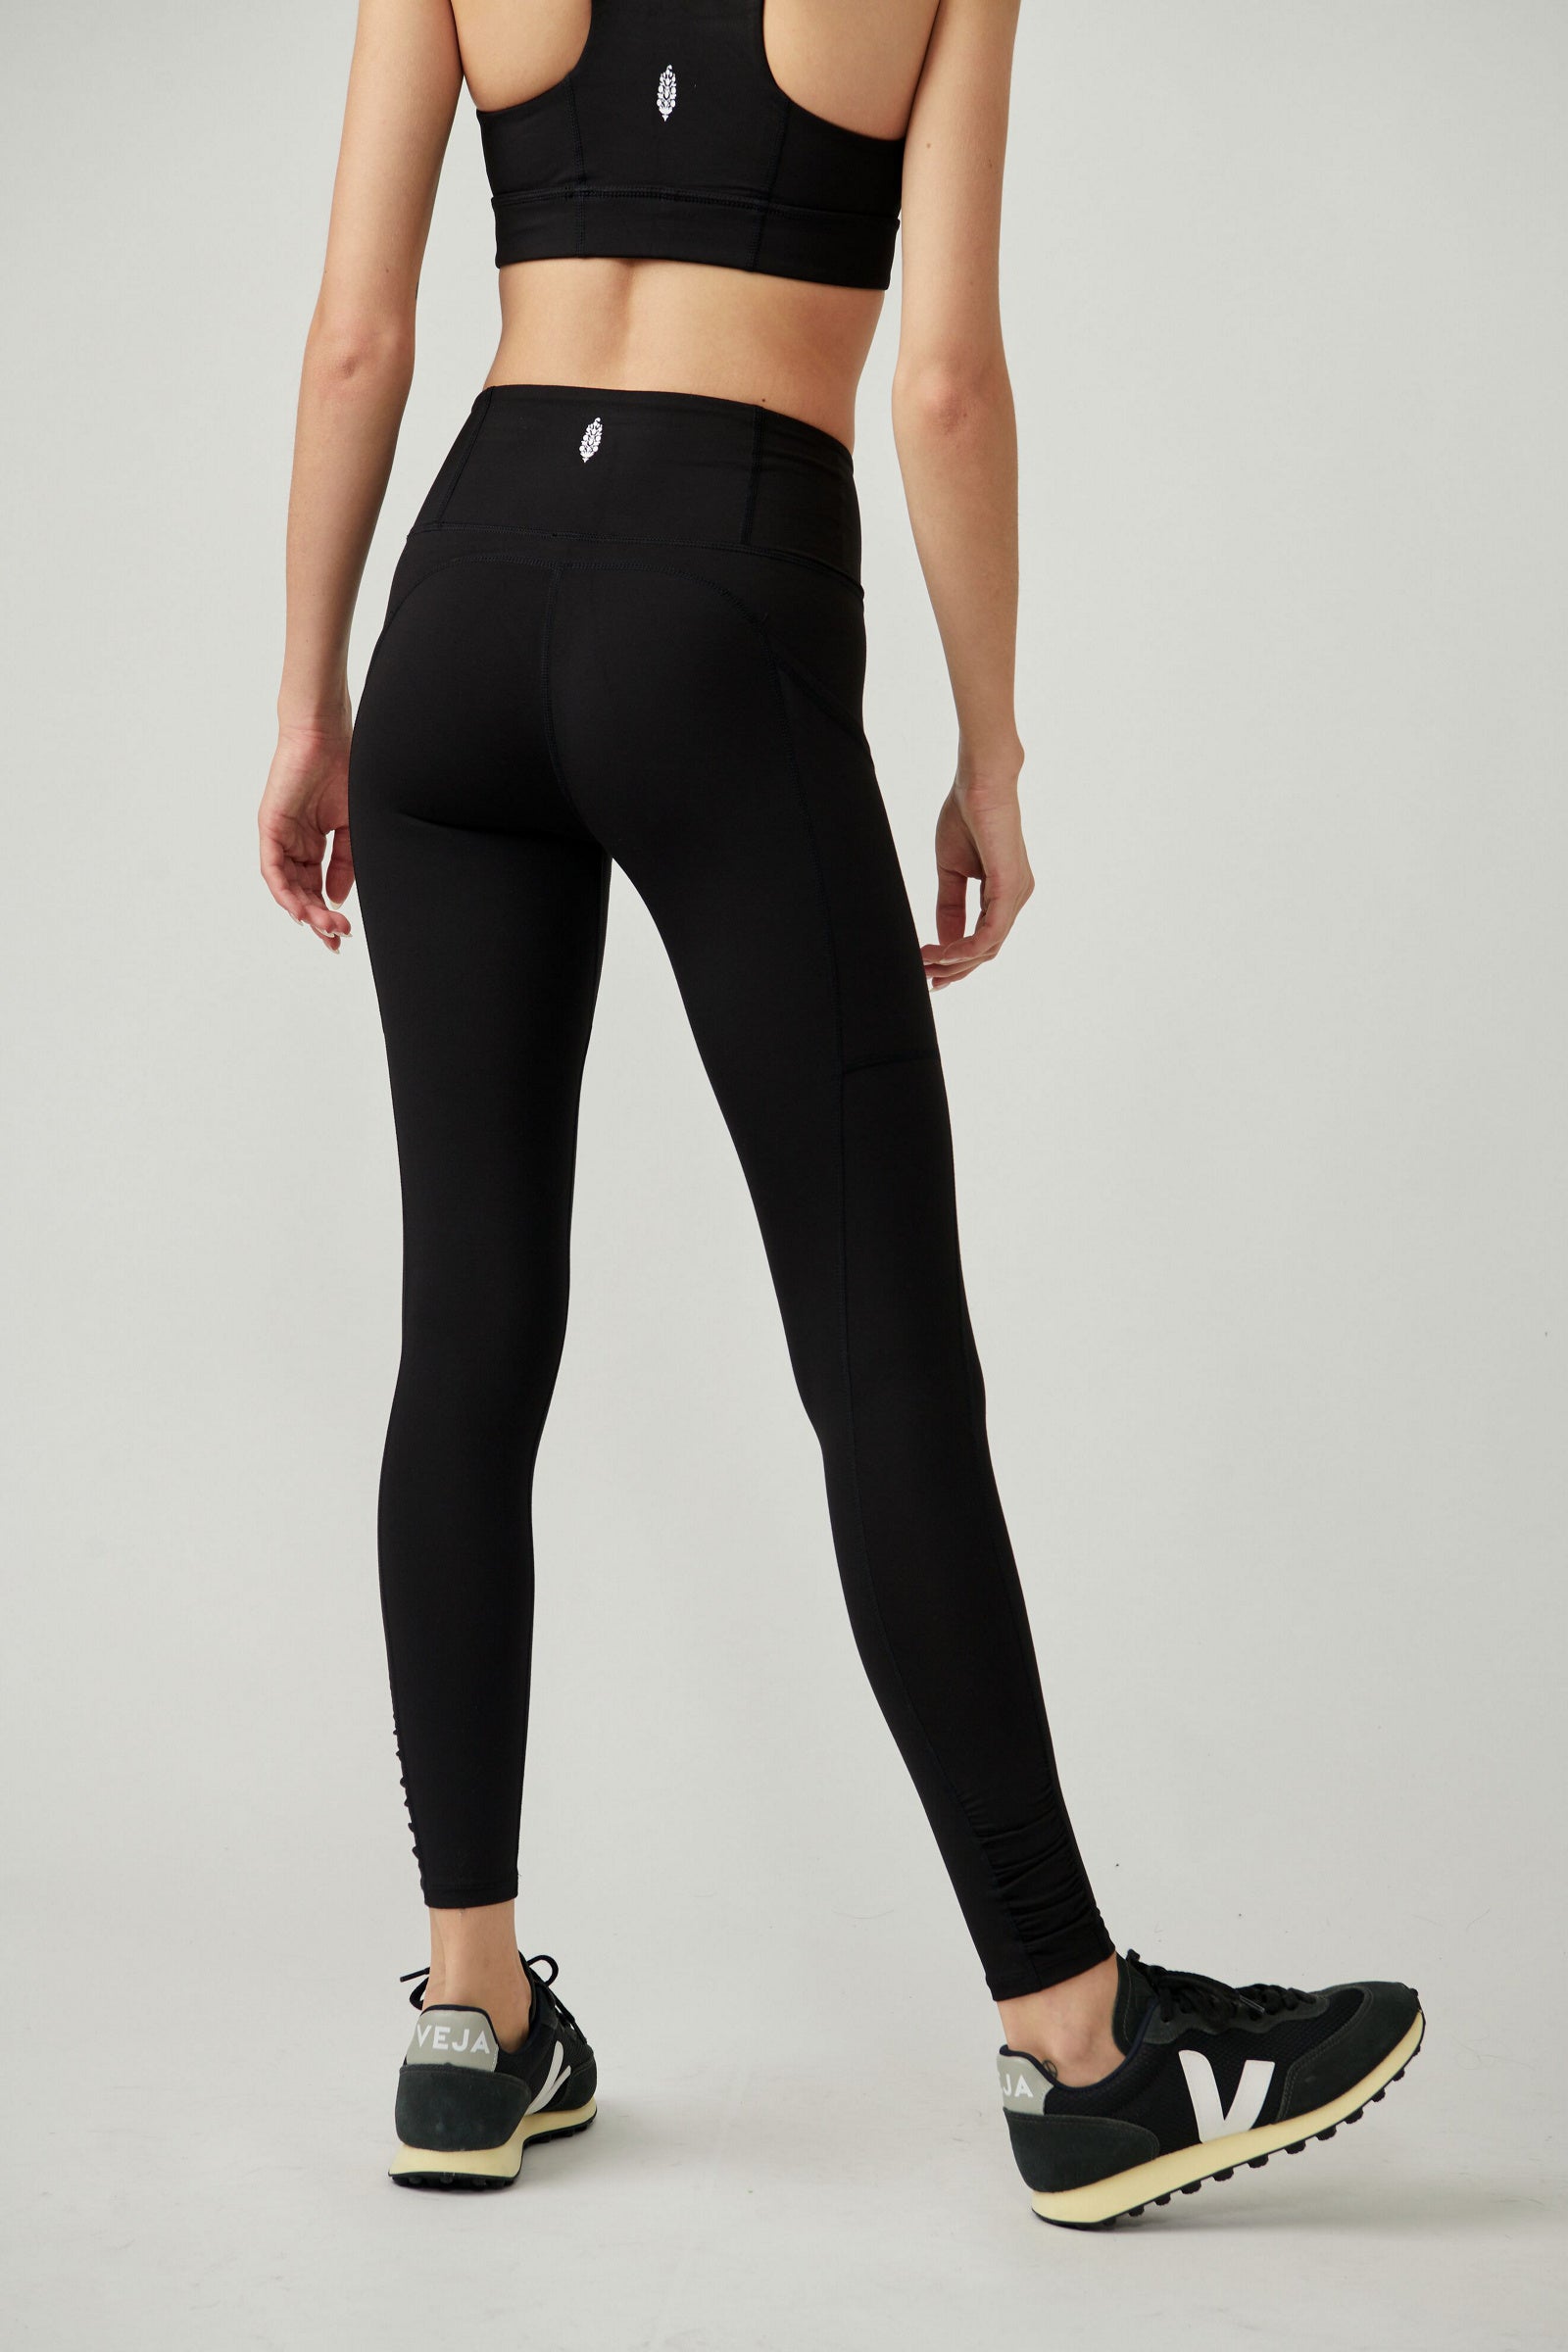 Free People - FP Movement Underneath It All Sports Leggings in Grey Combo